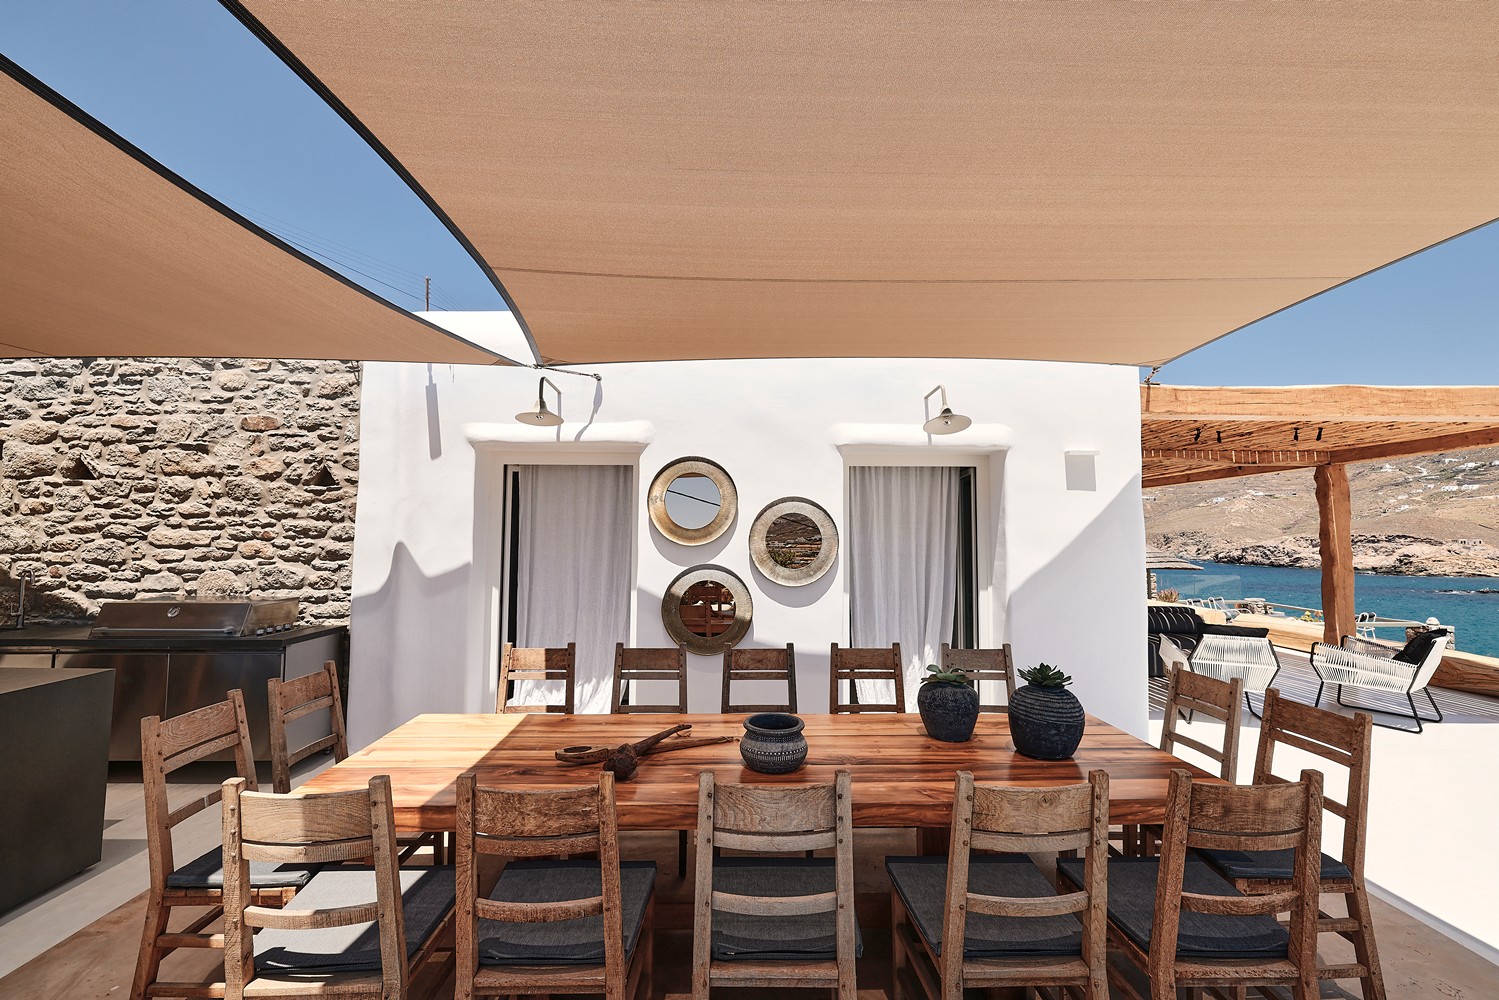 Private villa in Mykonos with an outdoor dining area